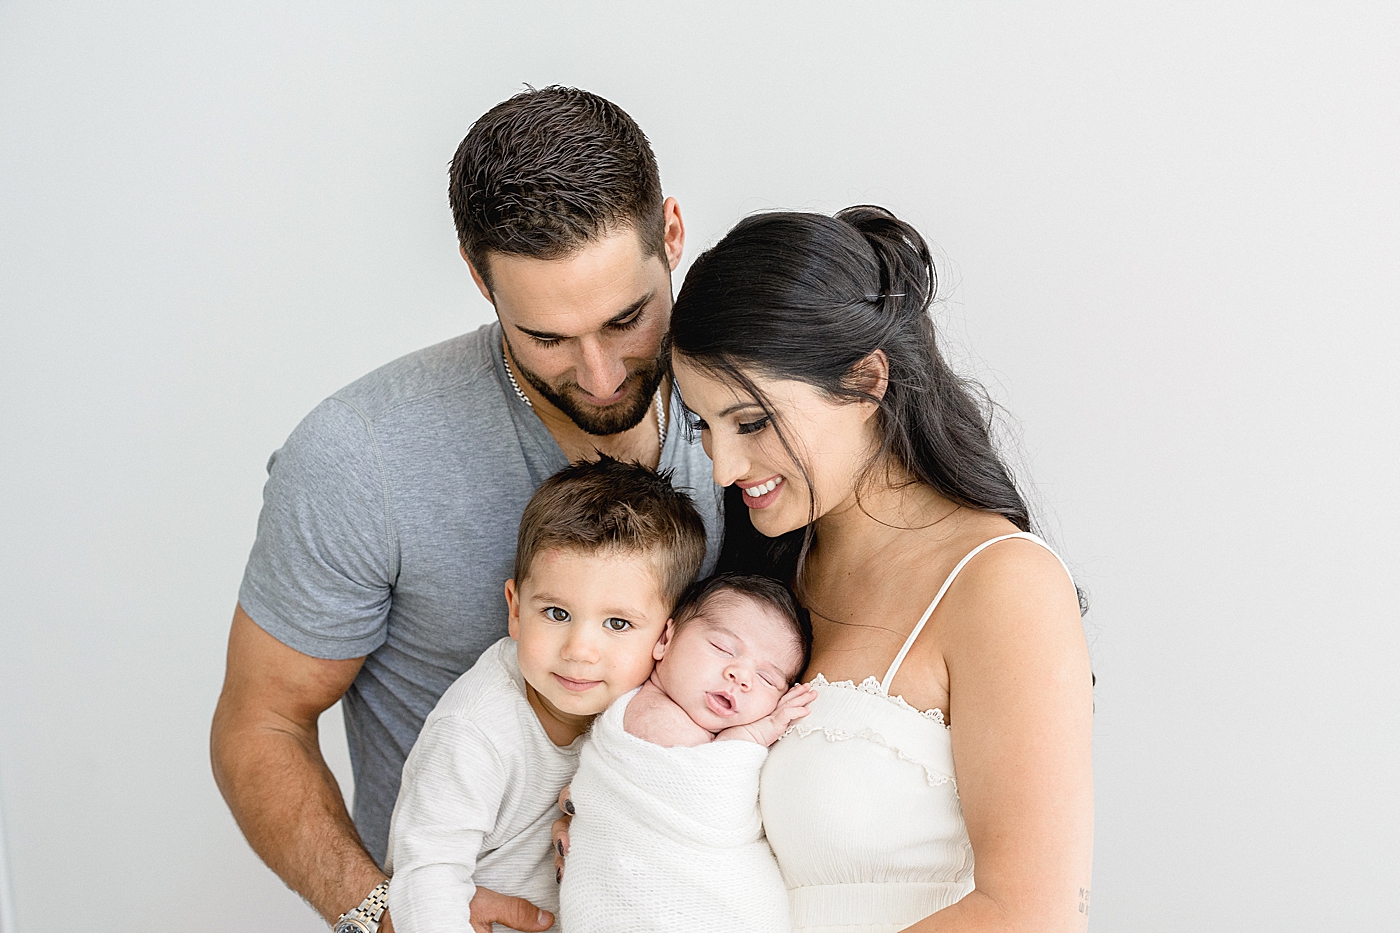 Sweet family moment during newborn session in Tampa photography studio with Brittany Elise Photography.